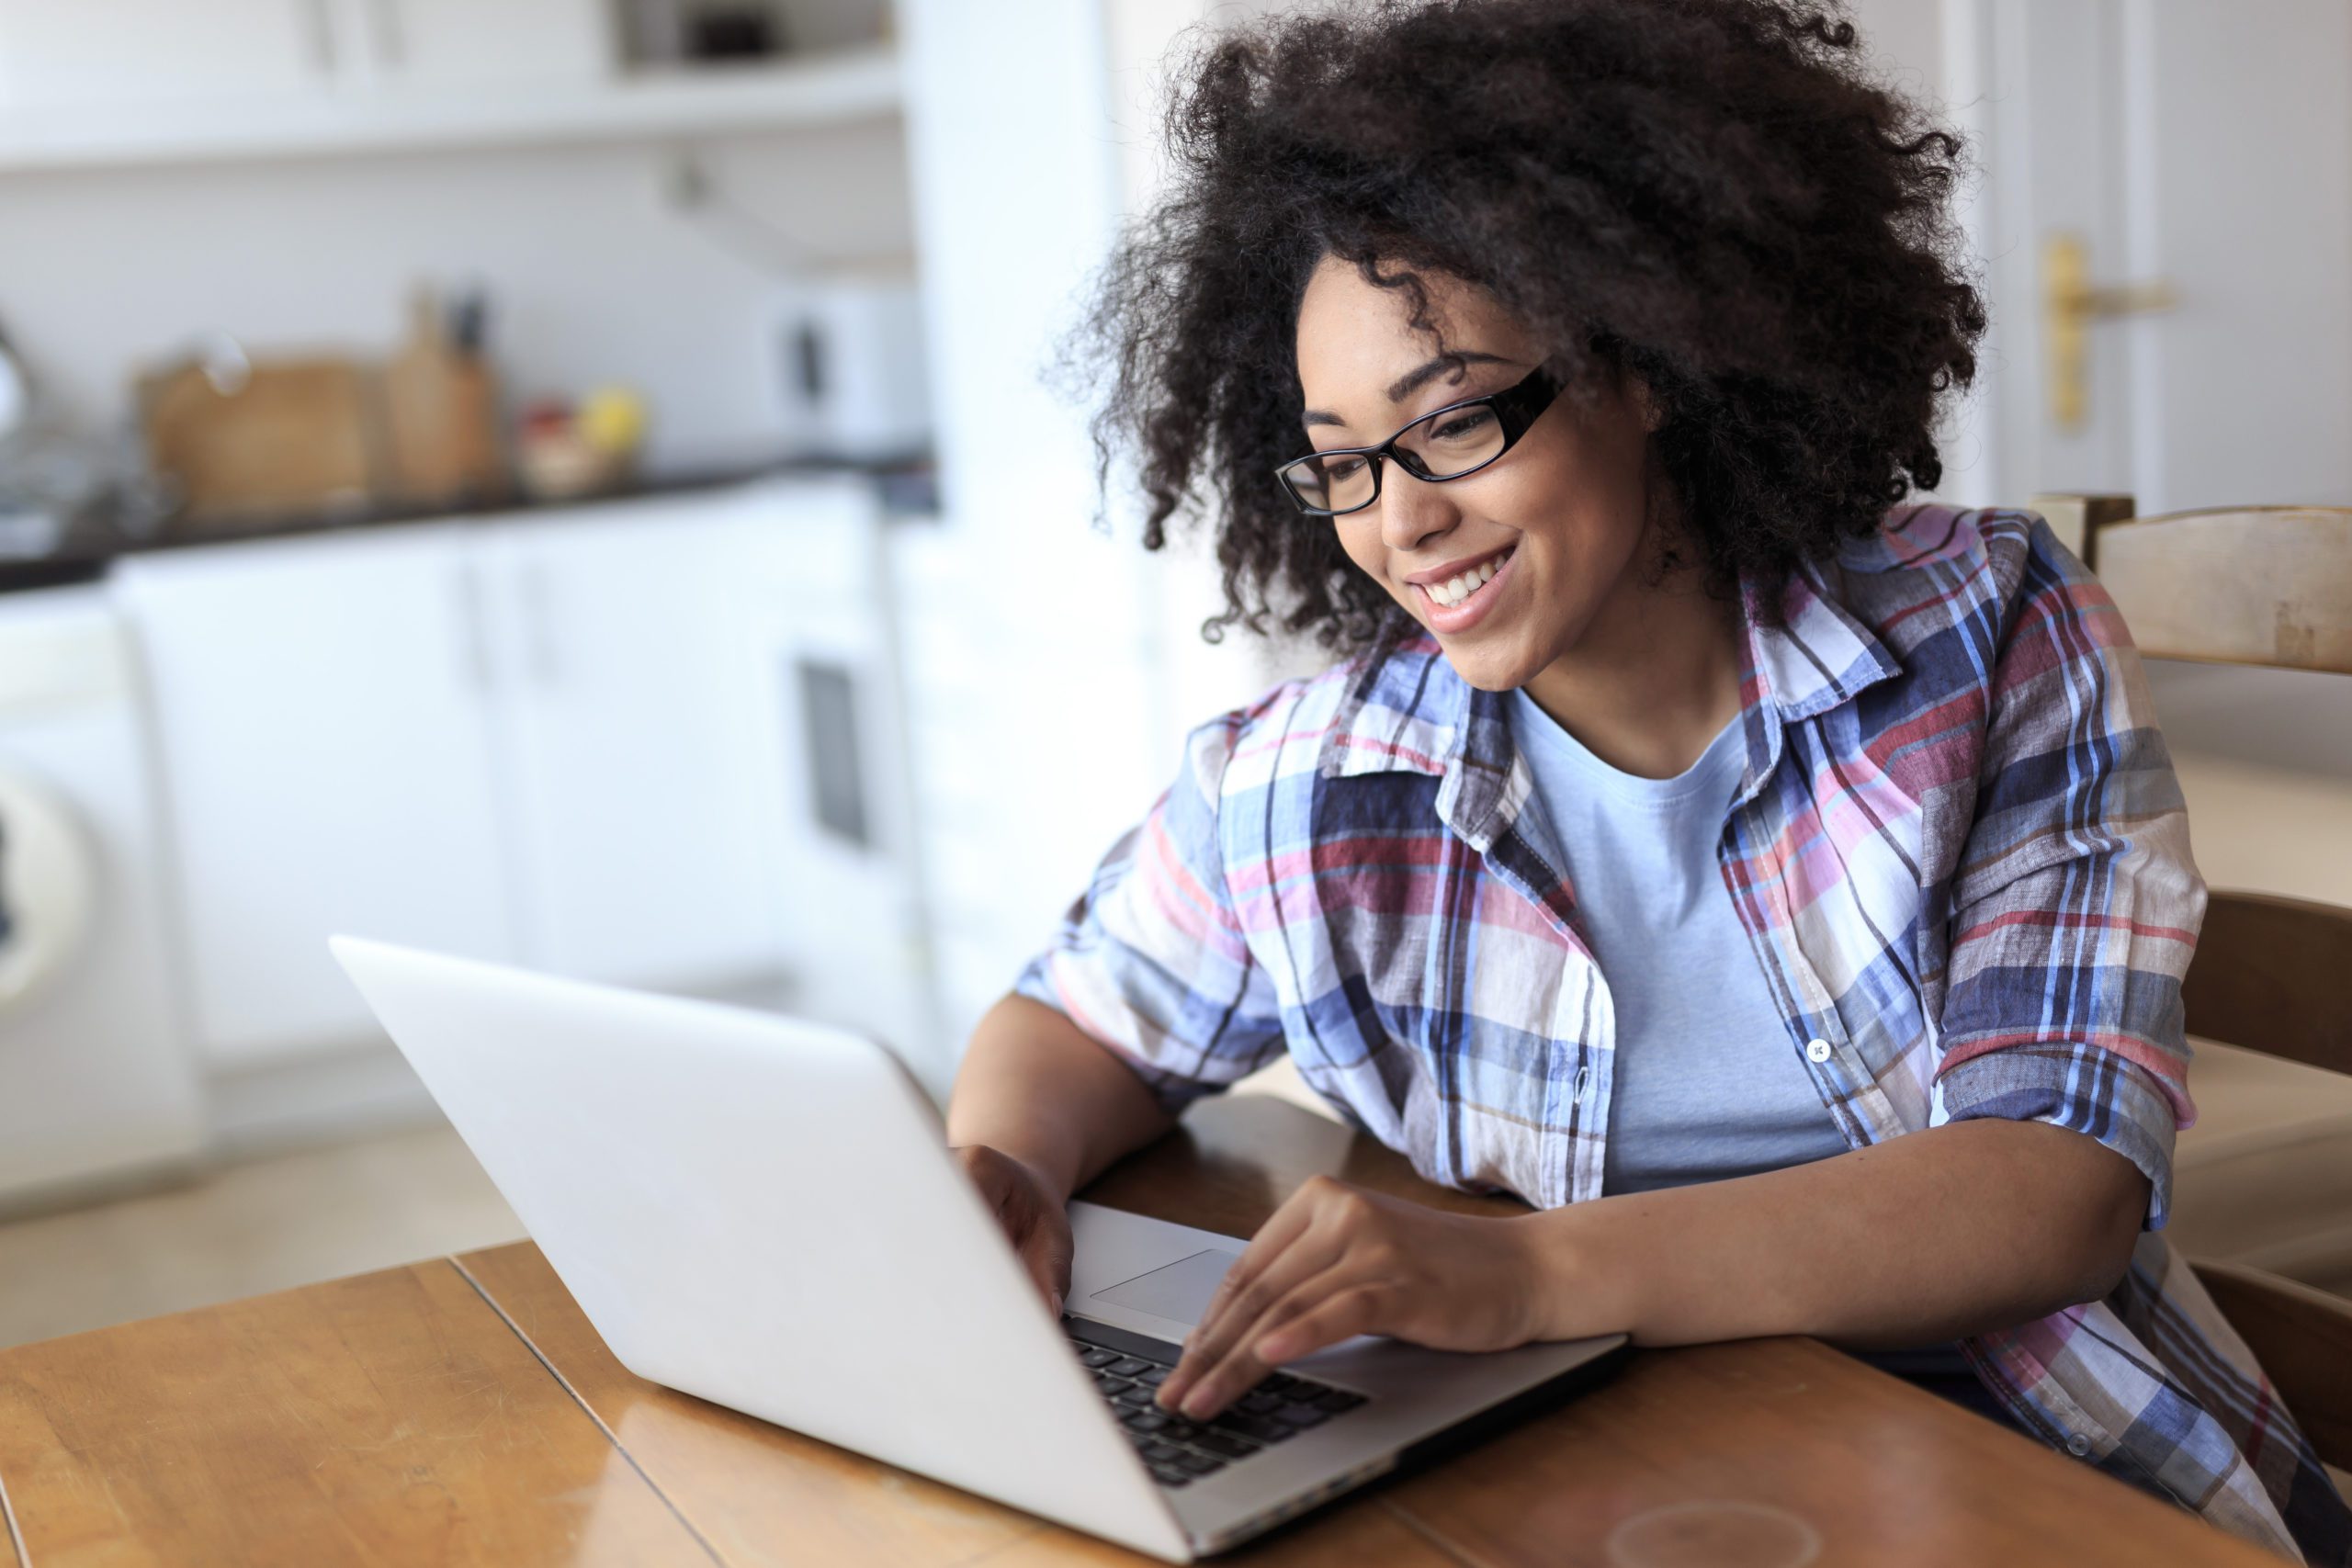 Smiling woman with eyeglasses using laptop at home.